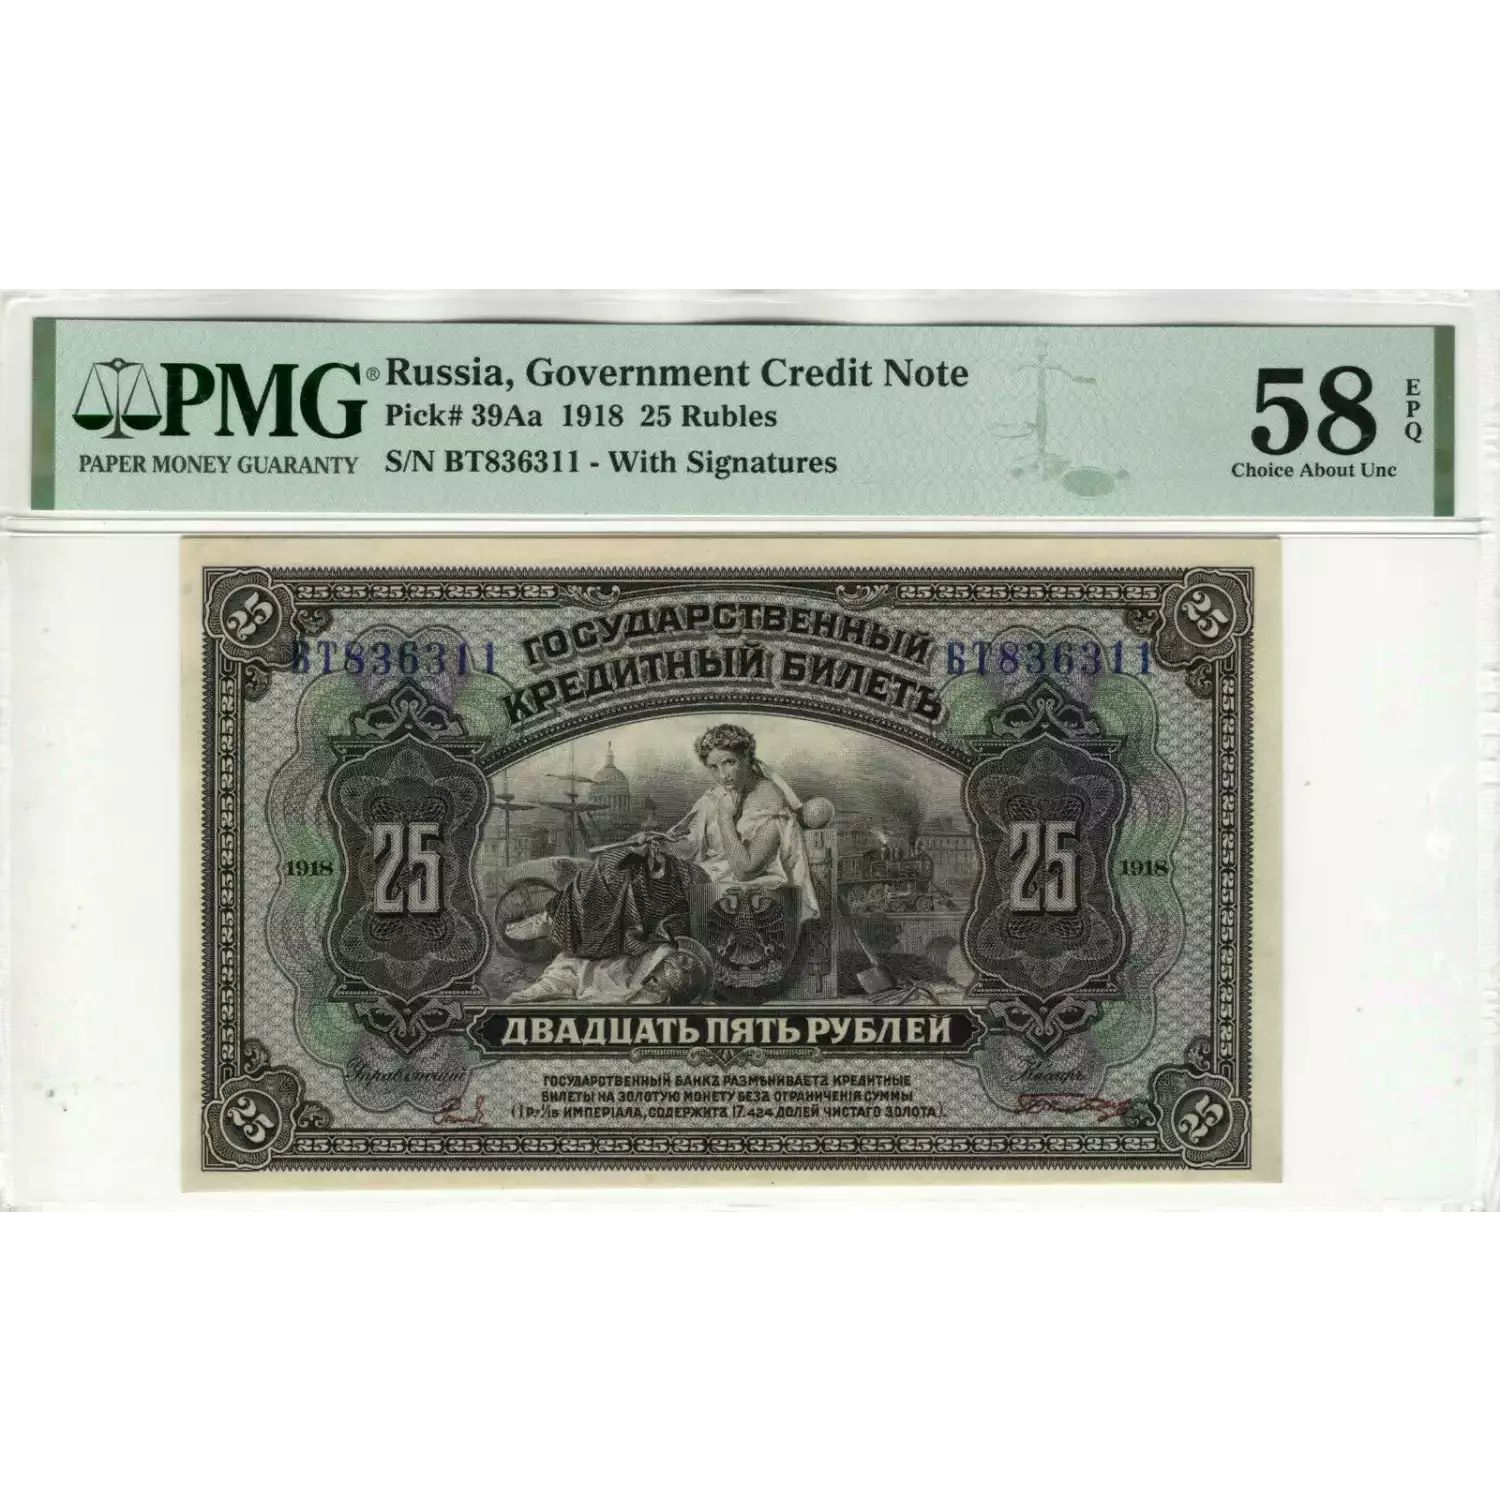 Russia, Government Credit Note